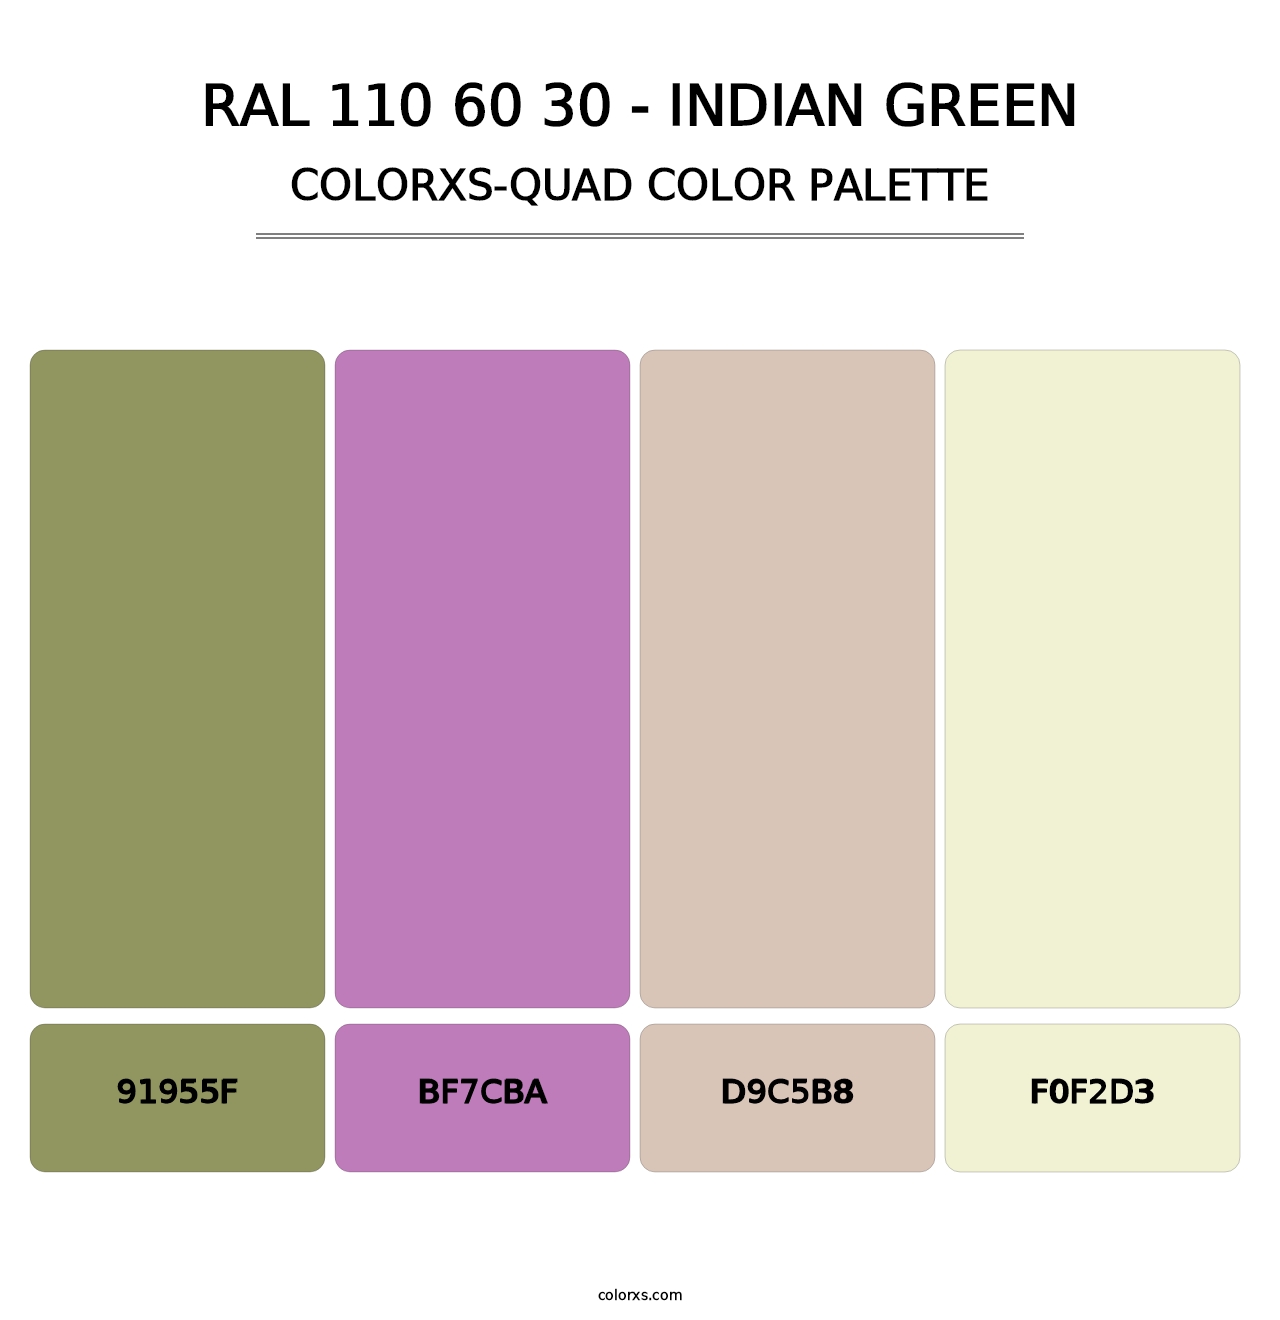 RAL 110 60 30 - Indian Green - Colorxs Quad Palette